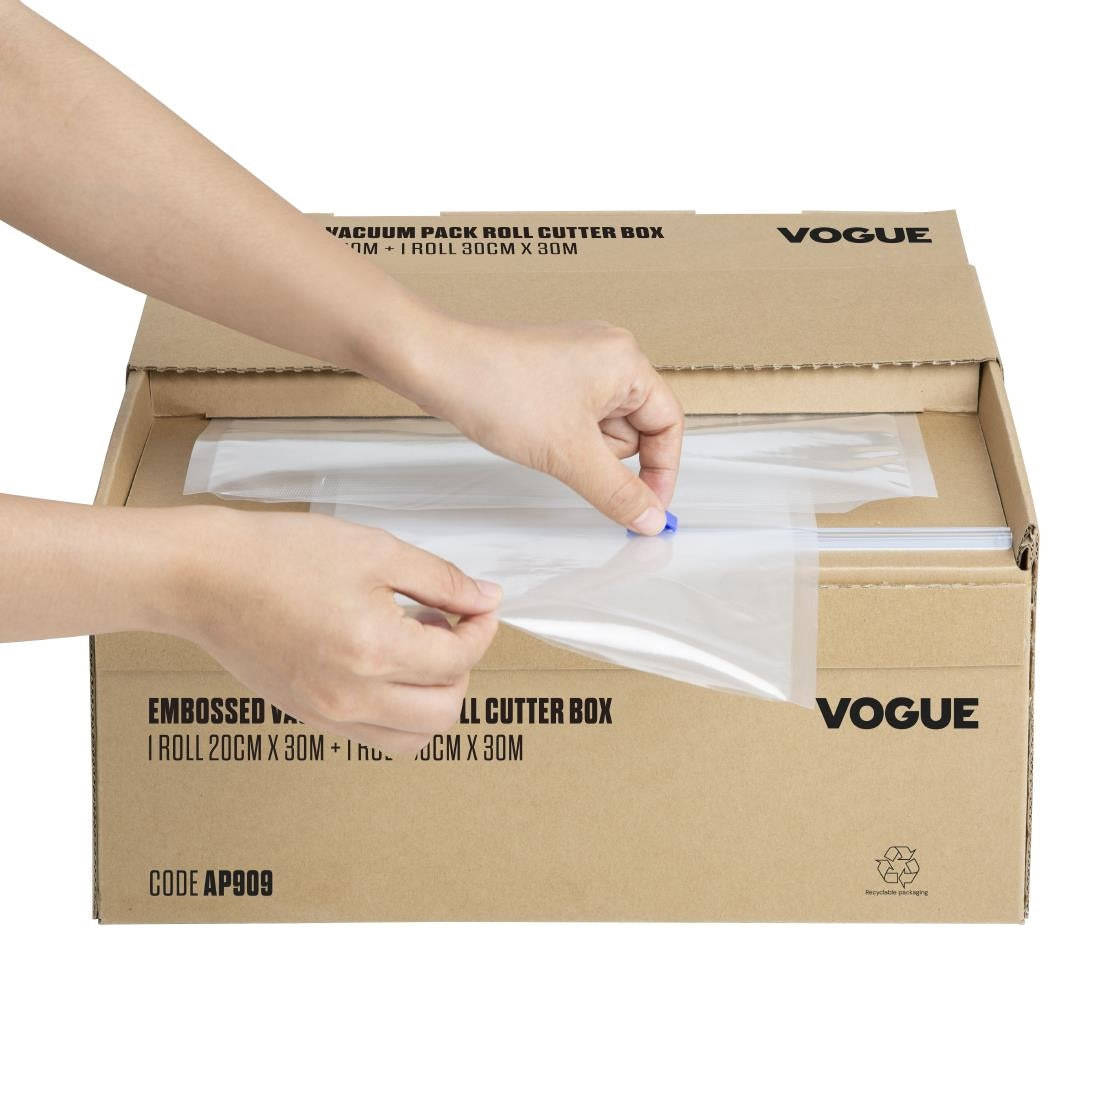 AP909 Vogue Vacuum Pack Roll with Cutter Box (Embossed) 200mm & 300mm Twin Pack